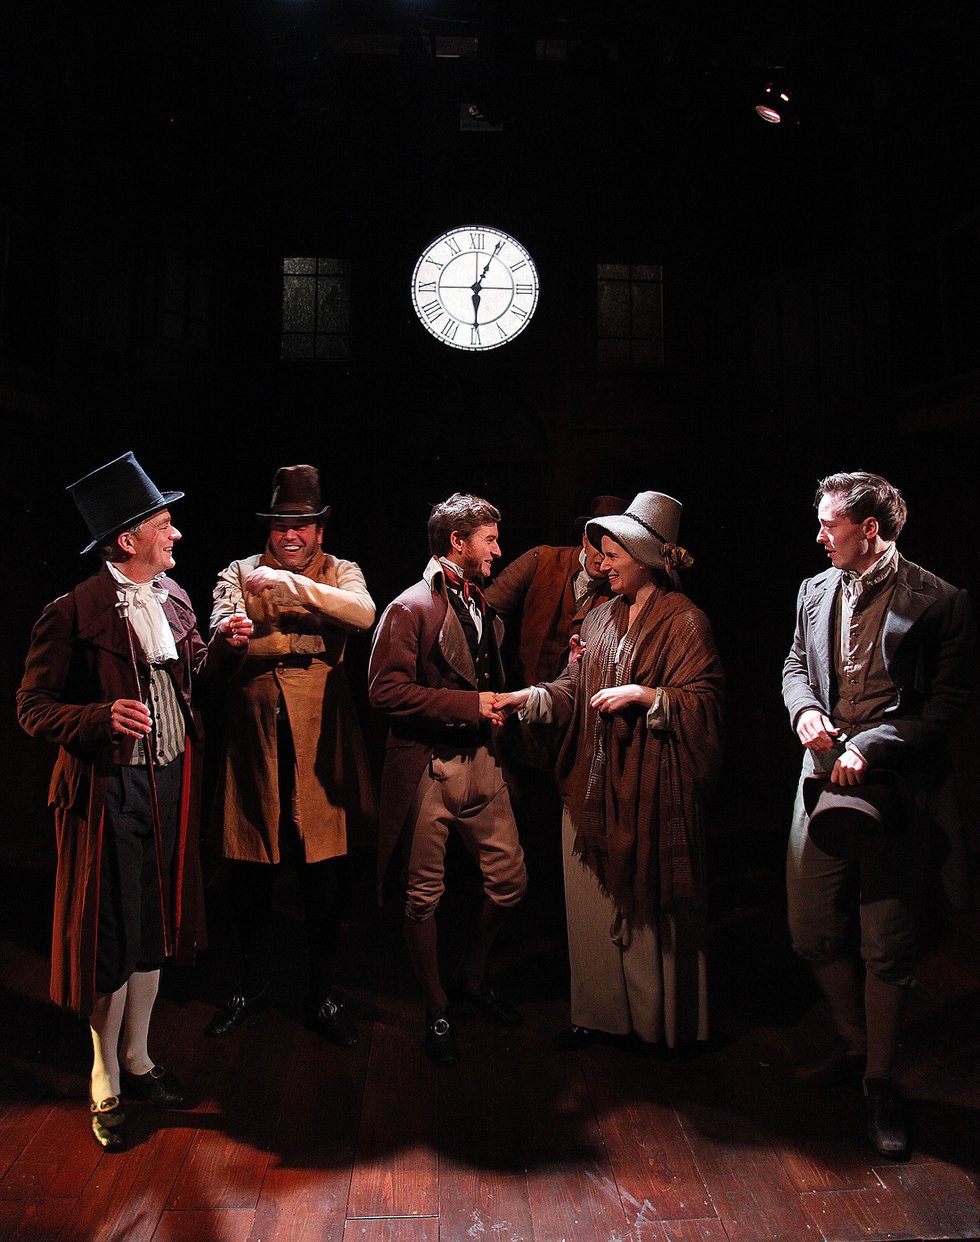 Trial By Laughter at The Watermill Theatre. Members of the cast. Photo by Philip Tull (2).jpg